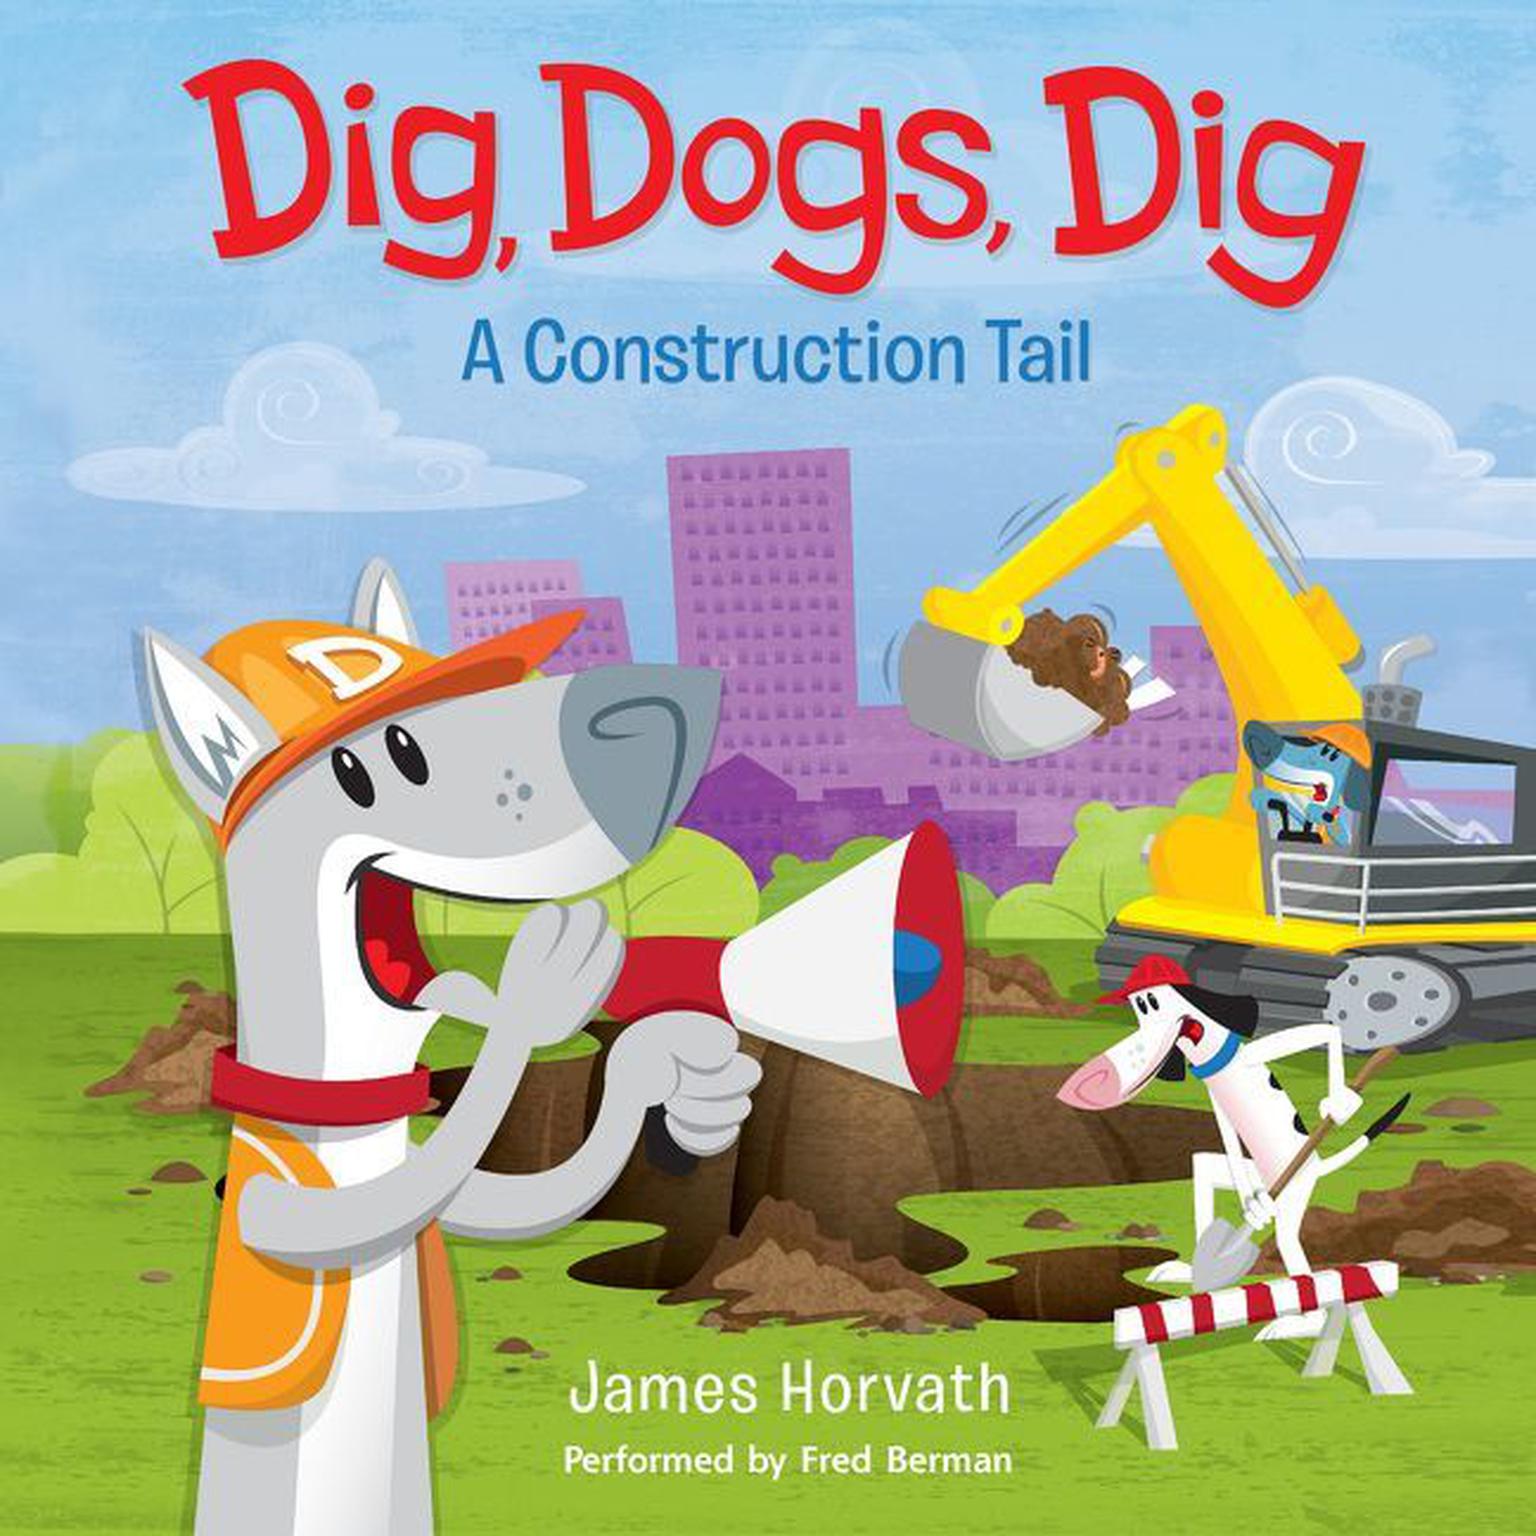 Dig, Dogs, Dig: A Construction Tail Audiobook, by James Horvath